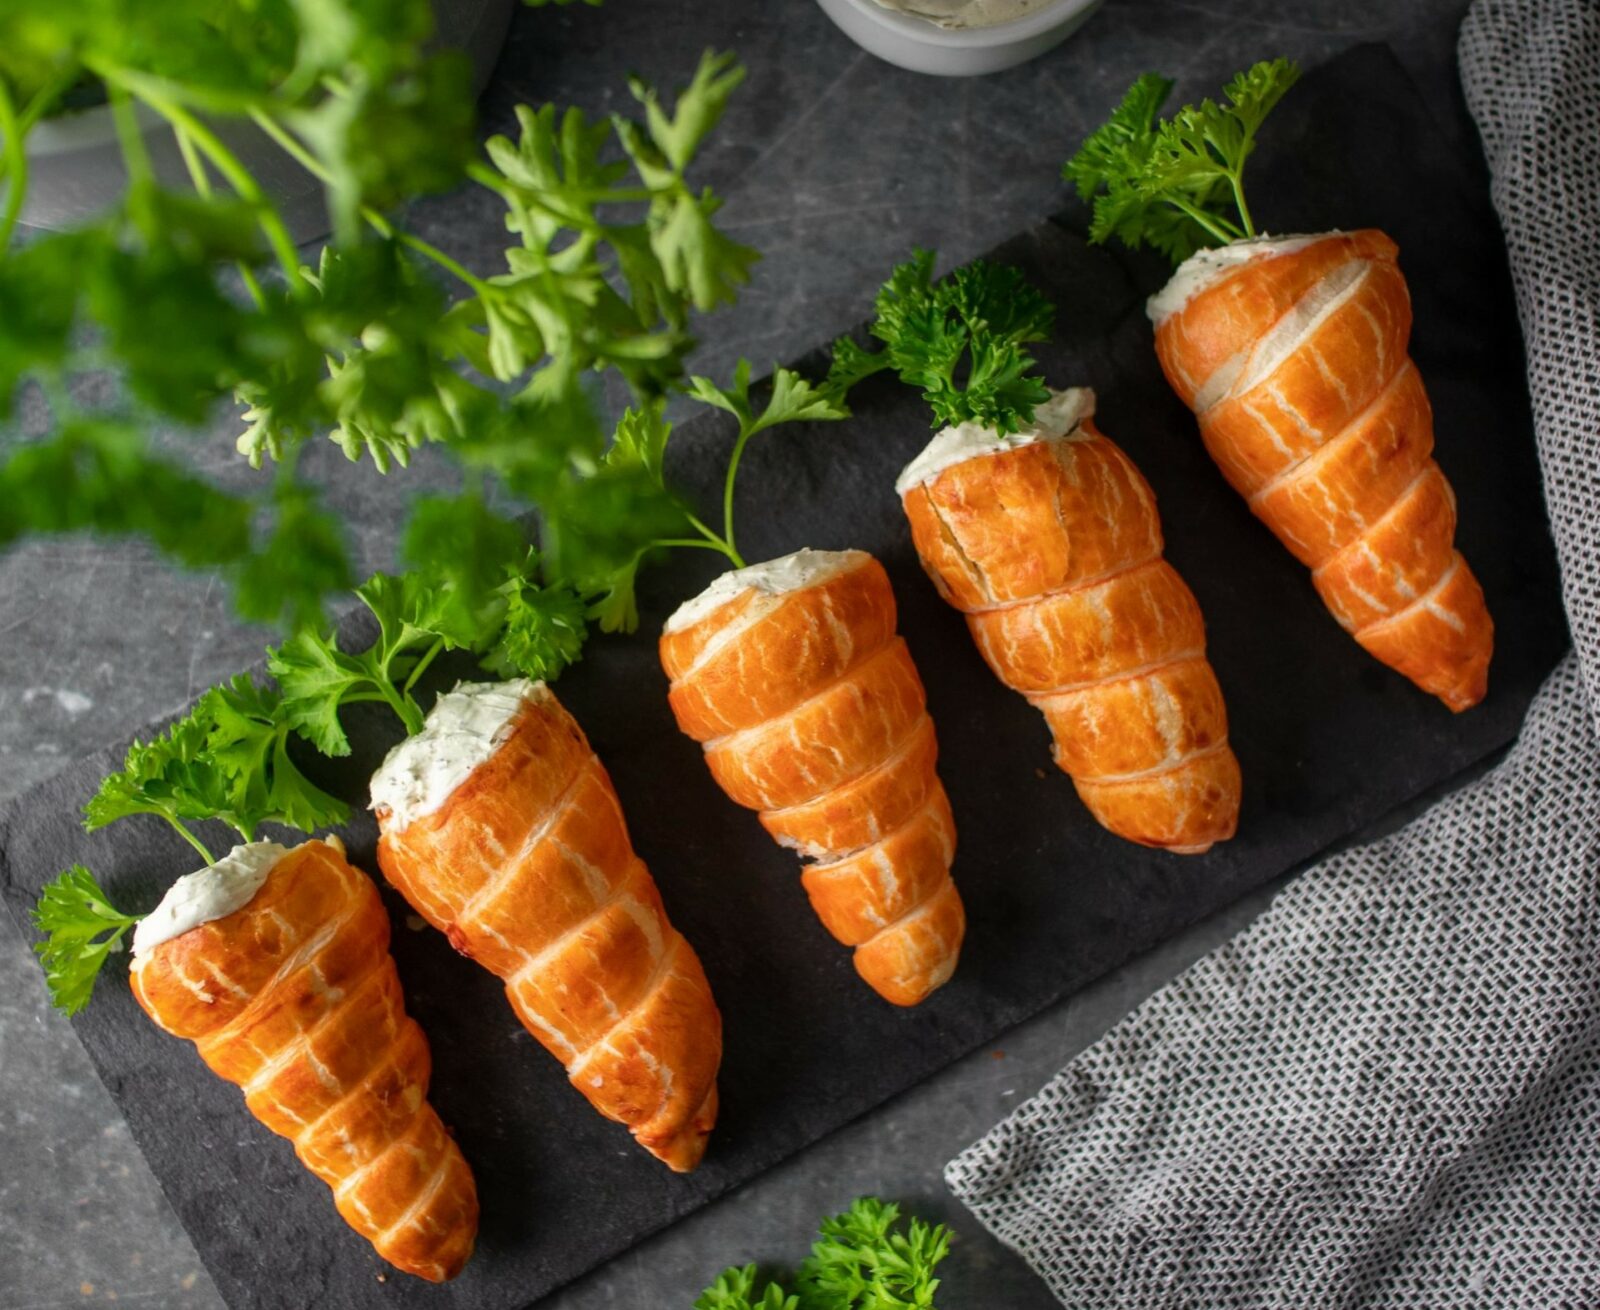 Puff pastry resembling carrots